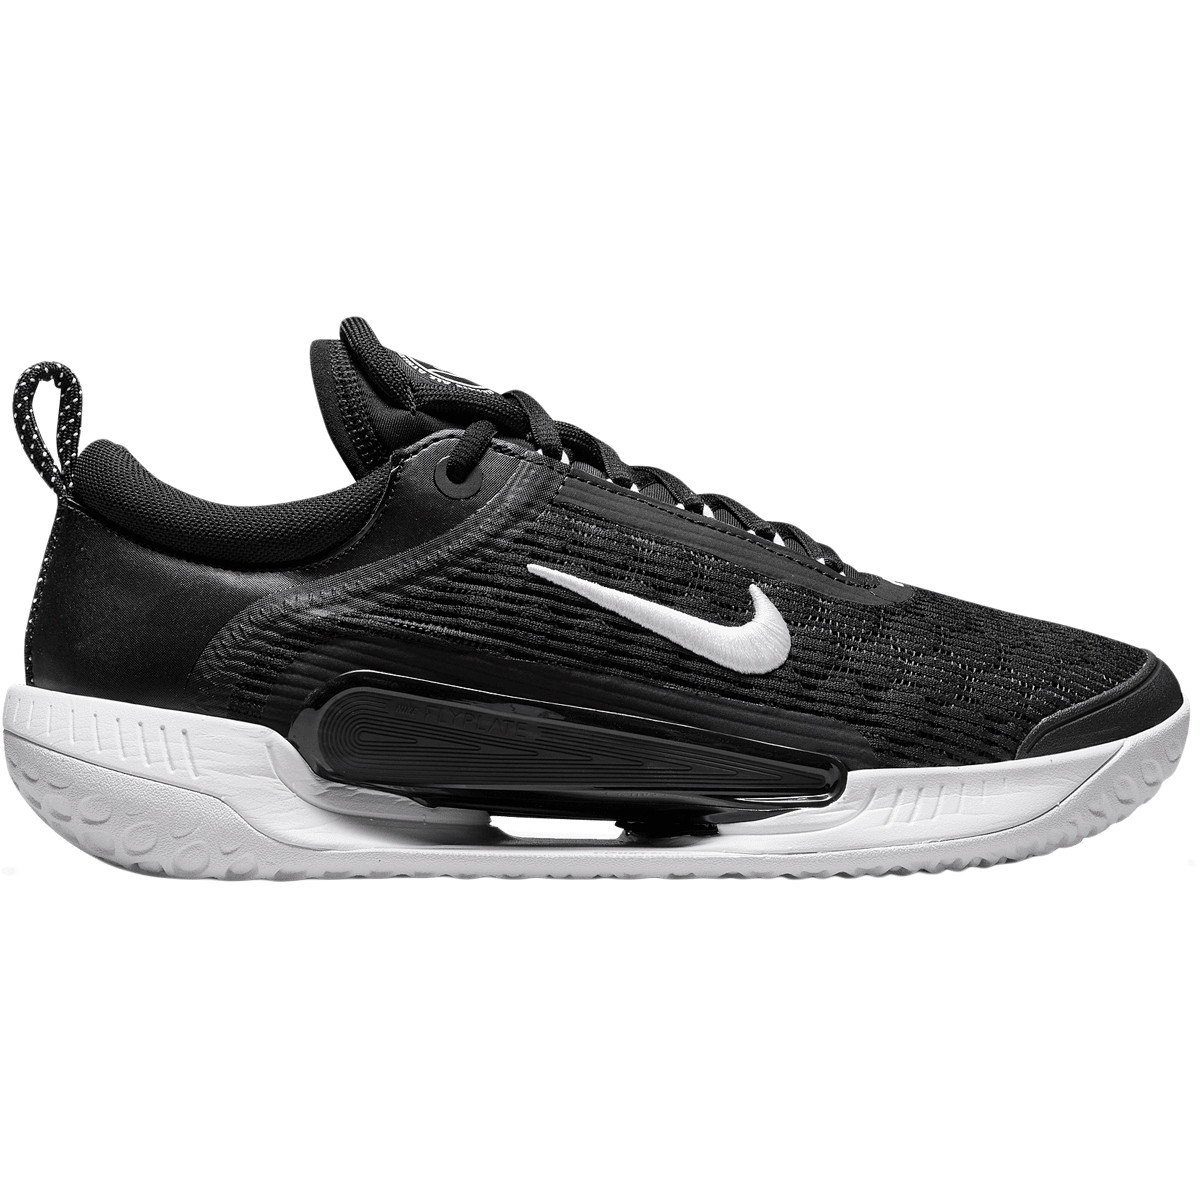 CHAUSSURES NIKE ZOOM COURT NXT SURFACES DURES